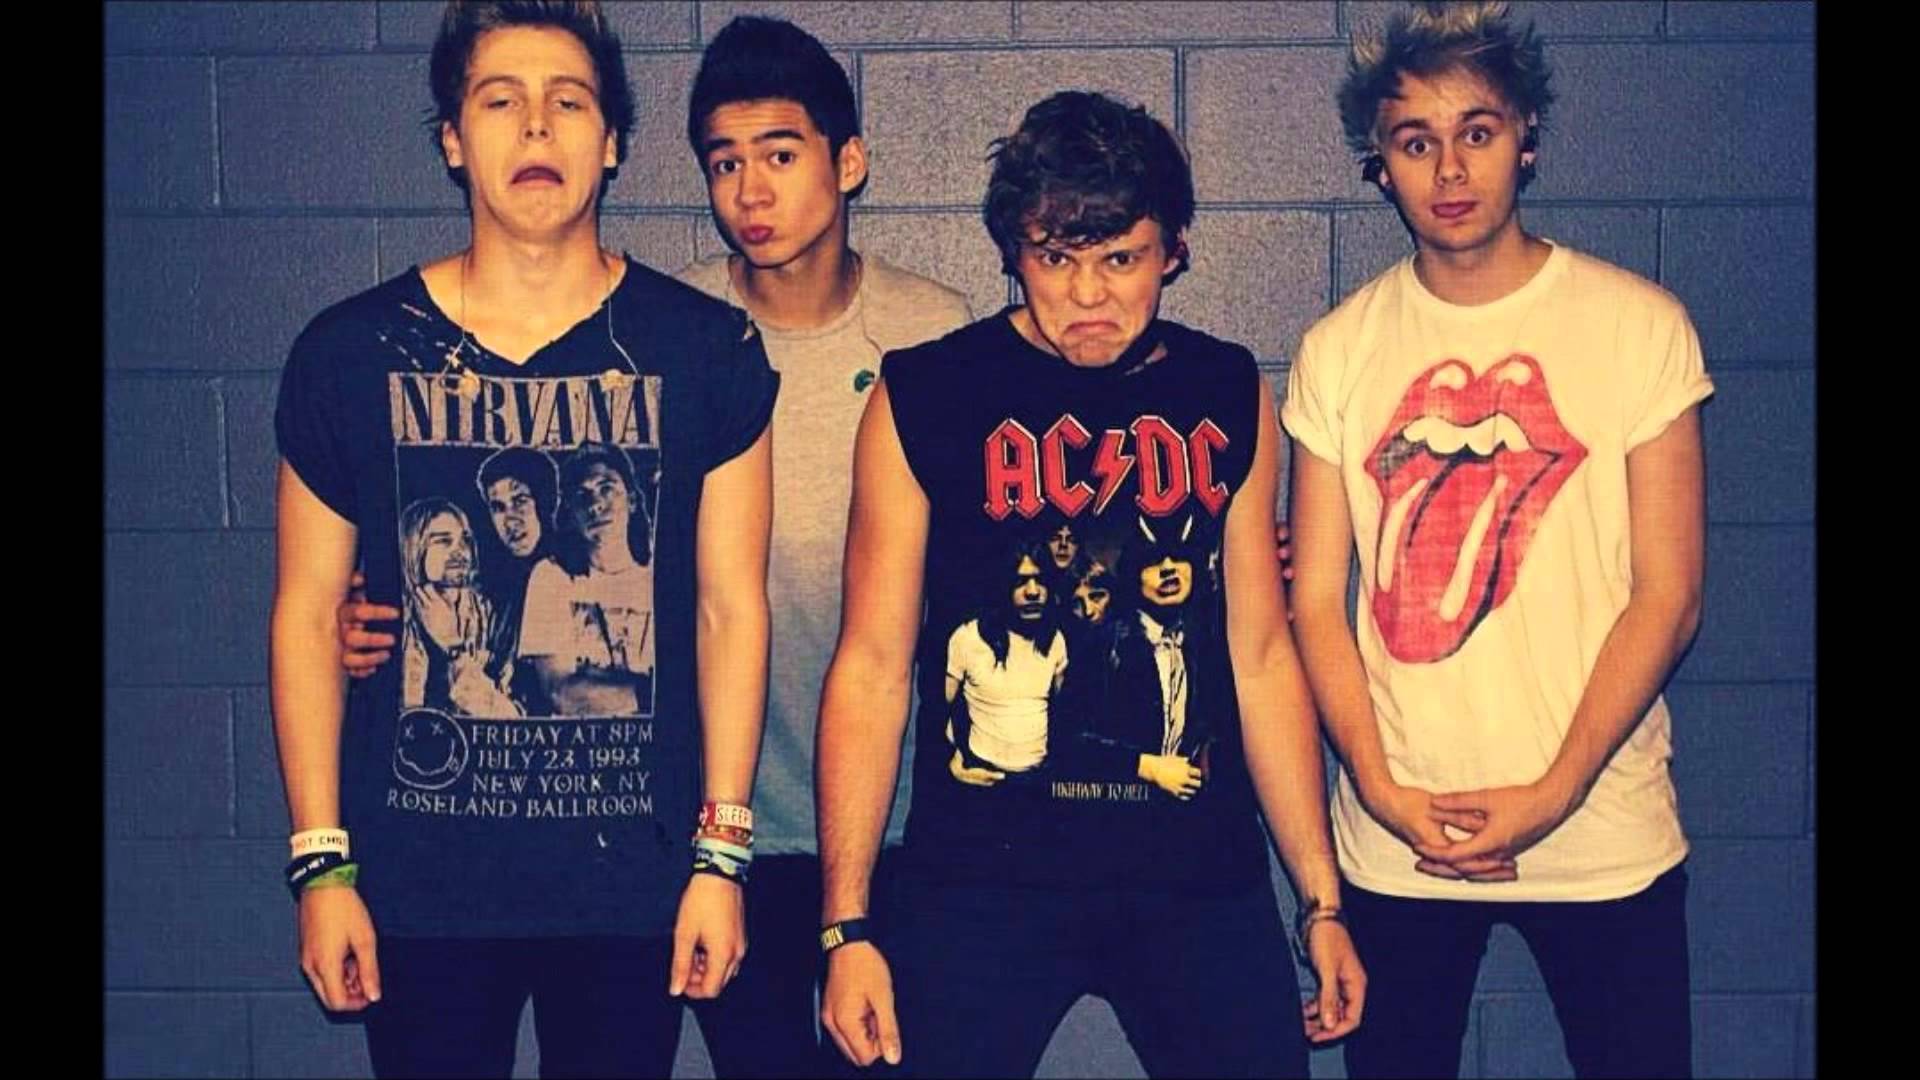 Seconds Of Summer HD Wallpaper And Photo download